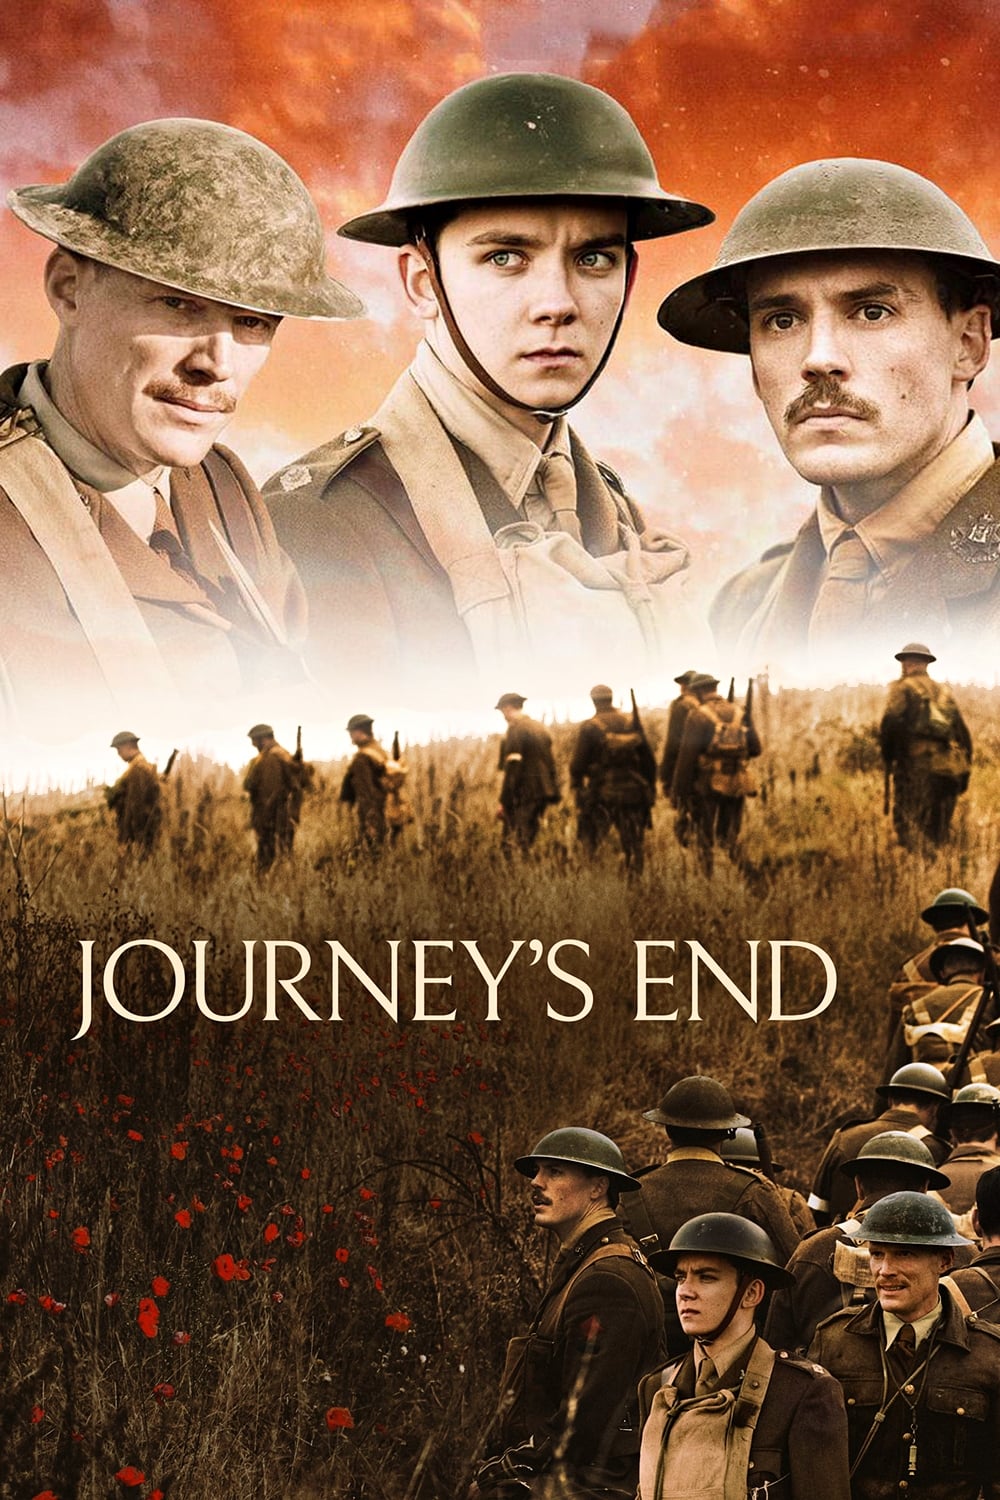 key events in journey's end